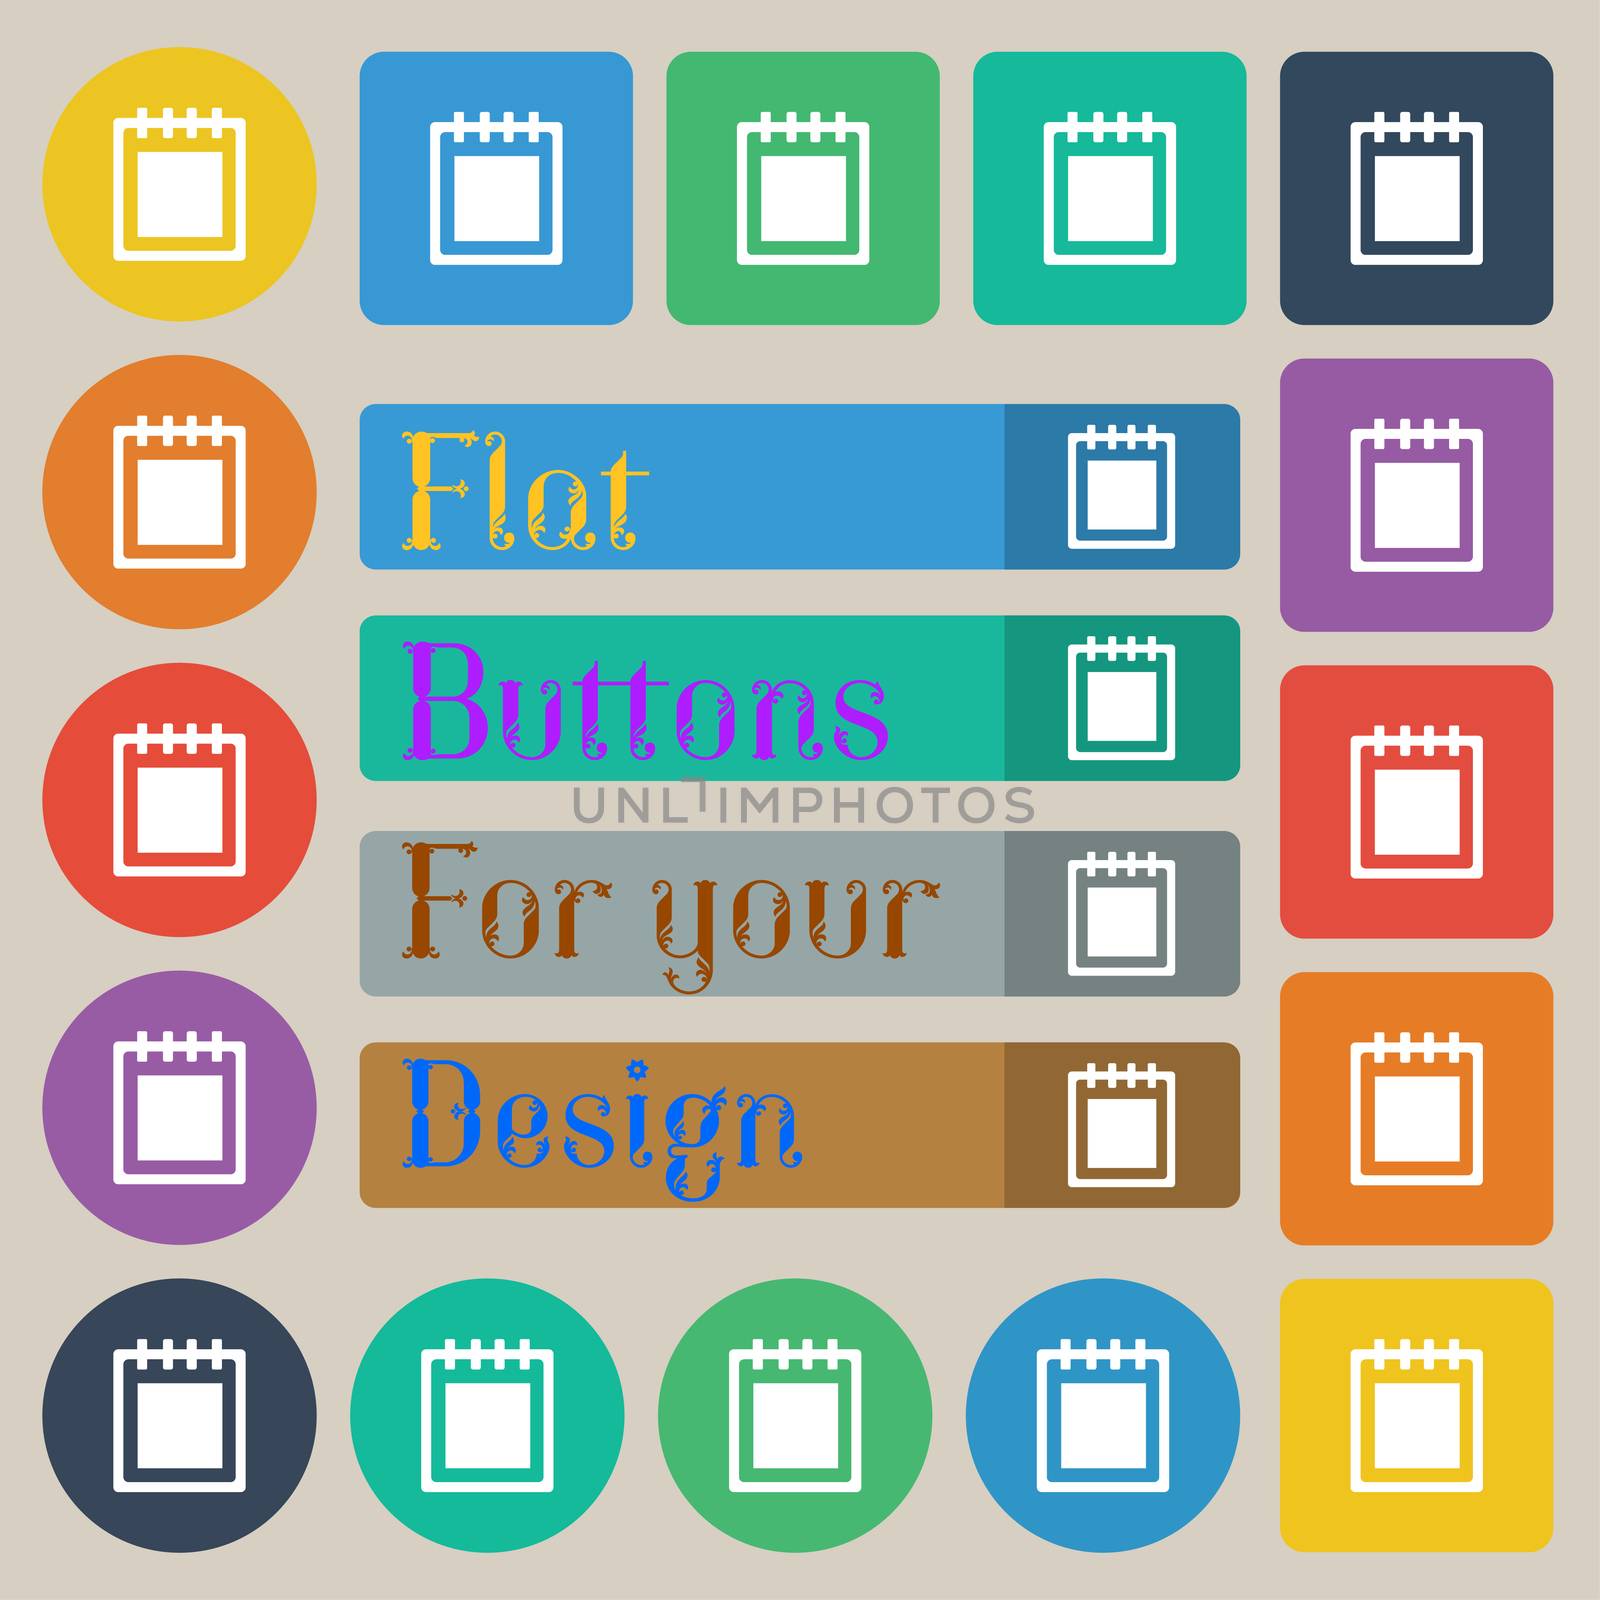 Notepad icon sign. Set of twenty colored flat, round, square and rectangular buttons. illustration